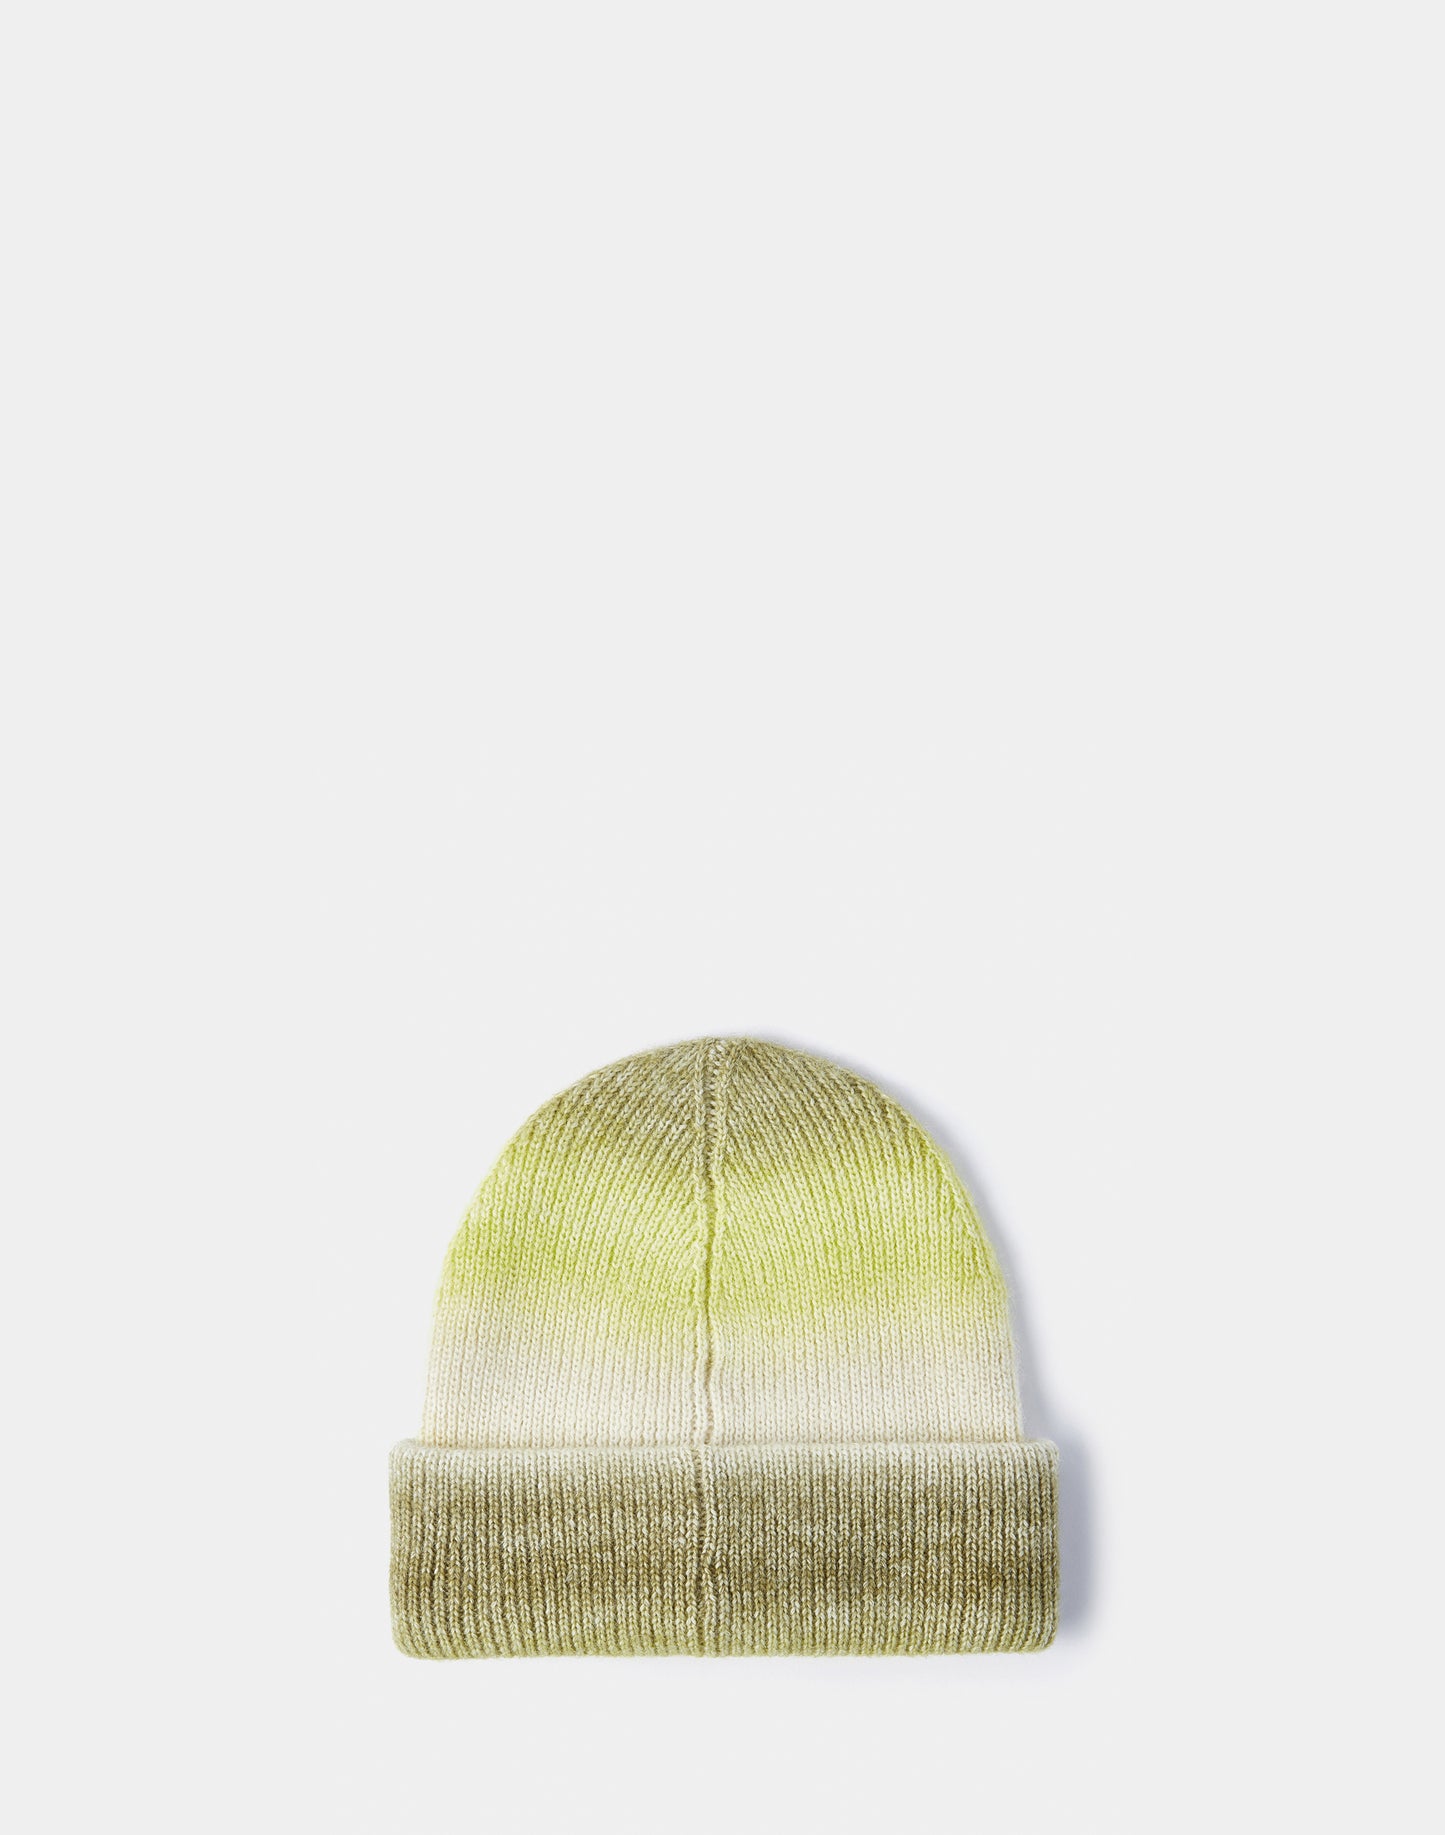 RIBBED CHILD'S BEANIE WITH EMBROIDERED LOGO